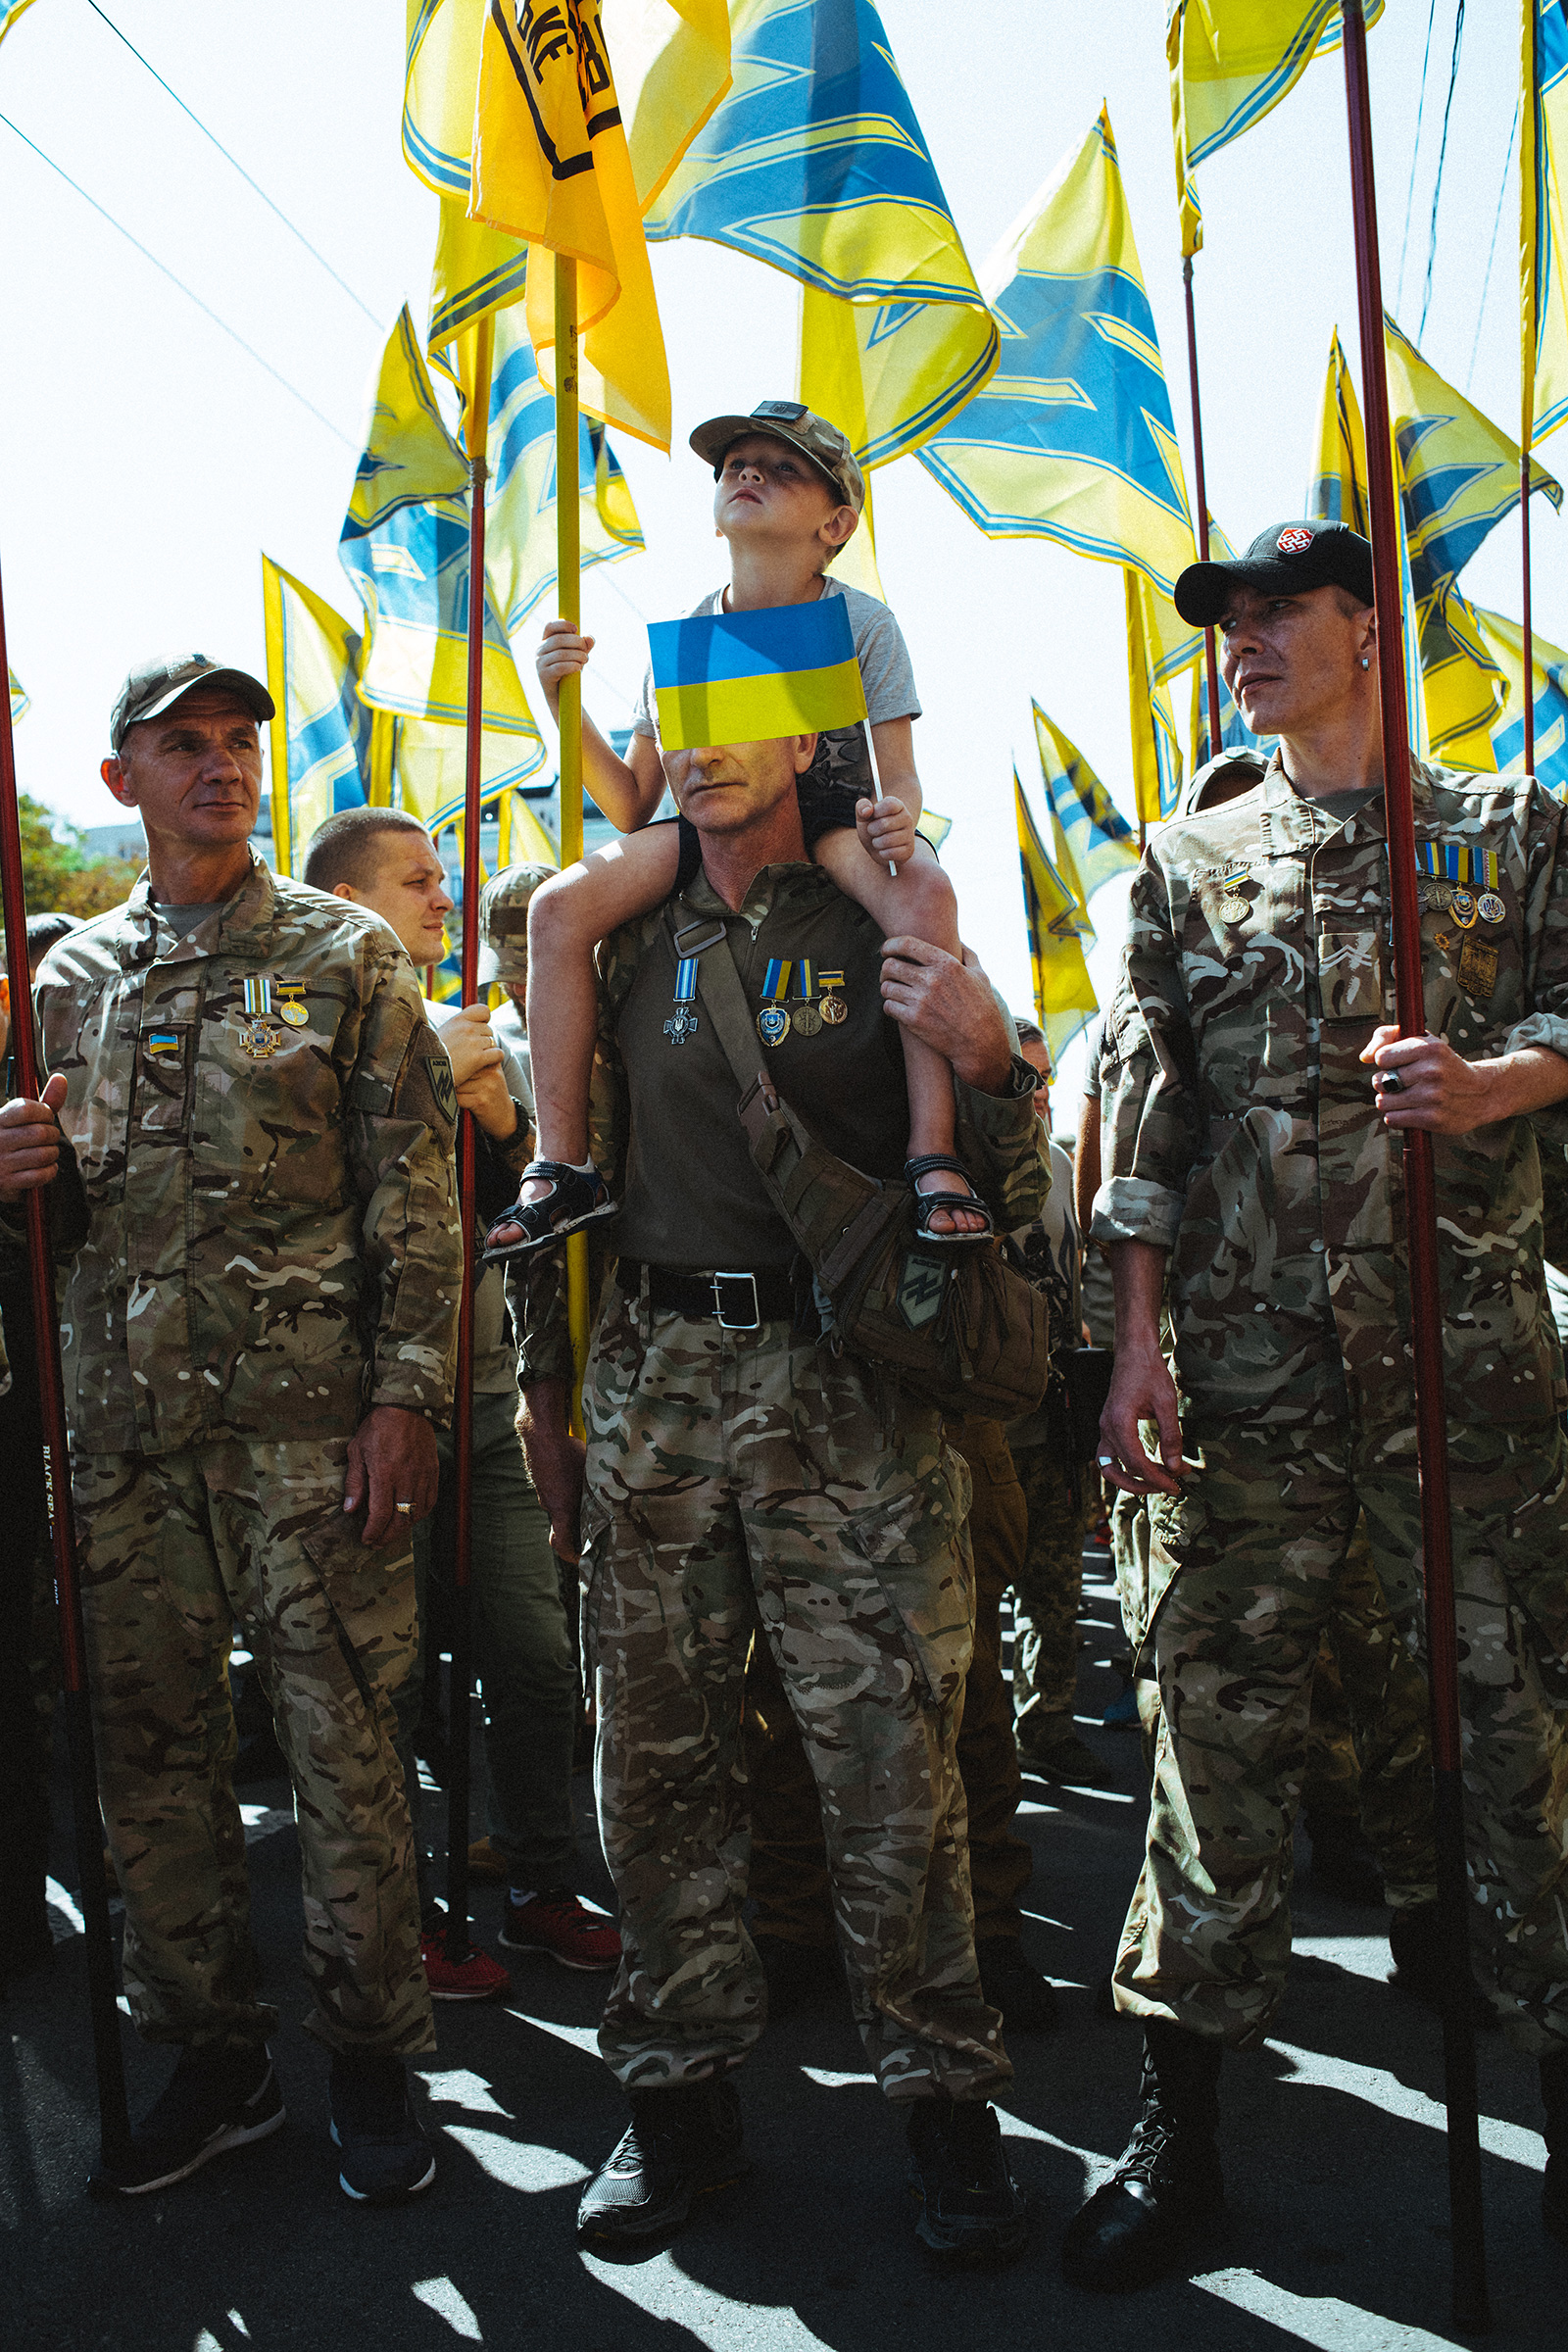 Azov Regiment veterans, whose banners carry an emblem derived from a Nazi symbol, the Wolfsangel, march in Kyiv in 2019. (Maxim Dondyuk for TIME)